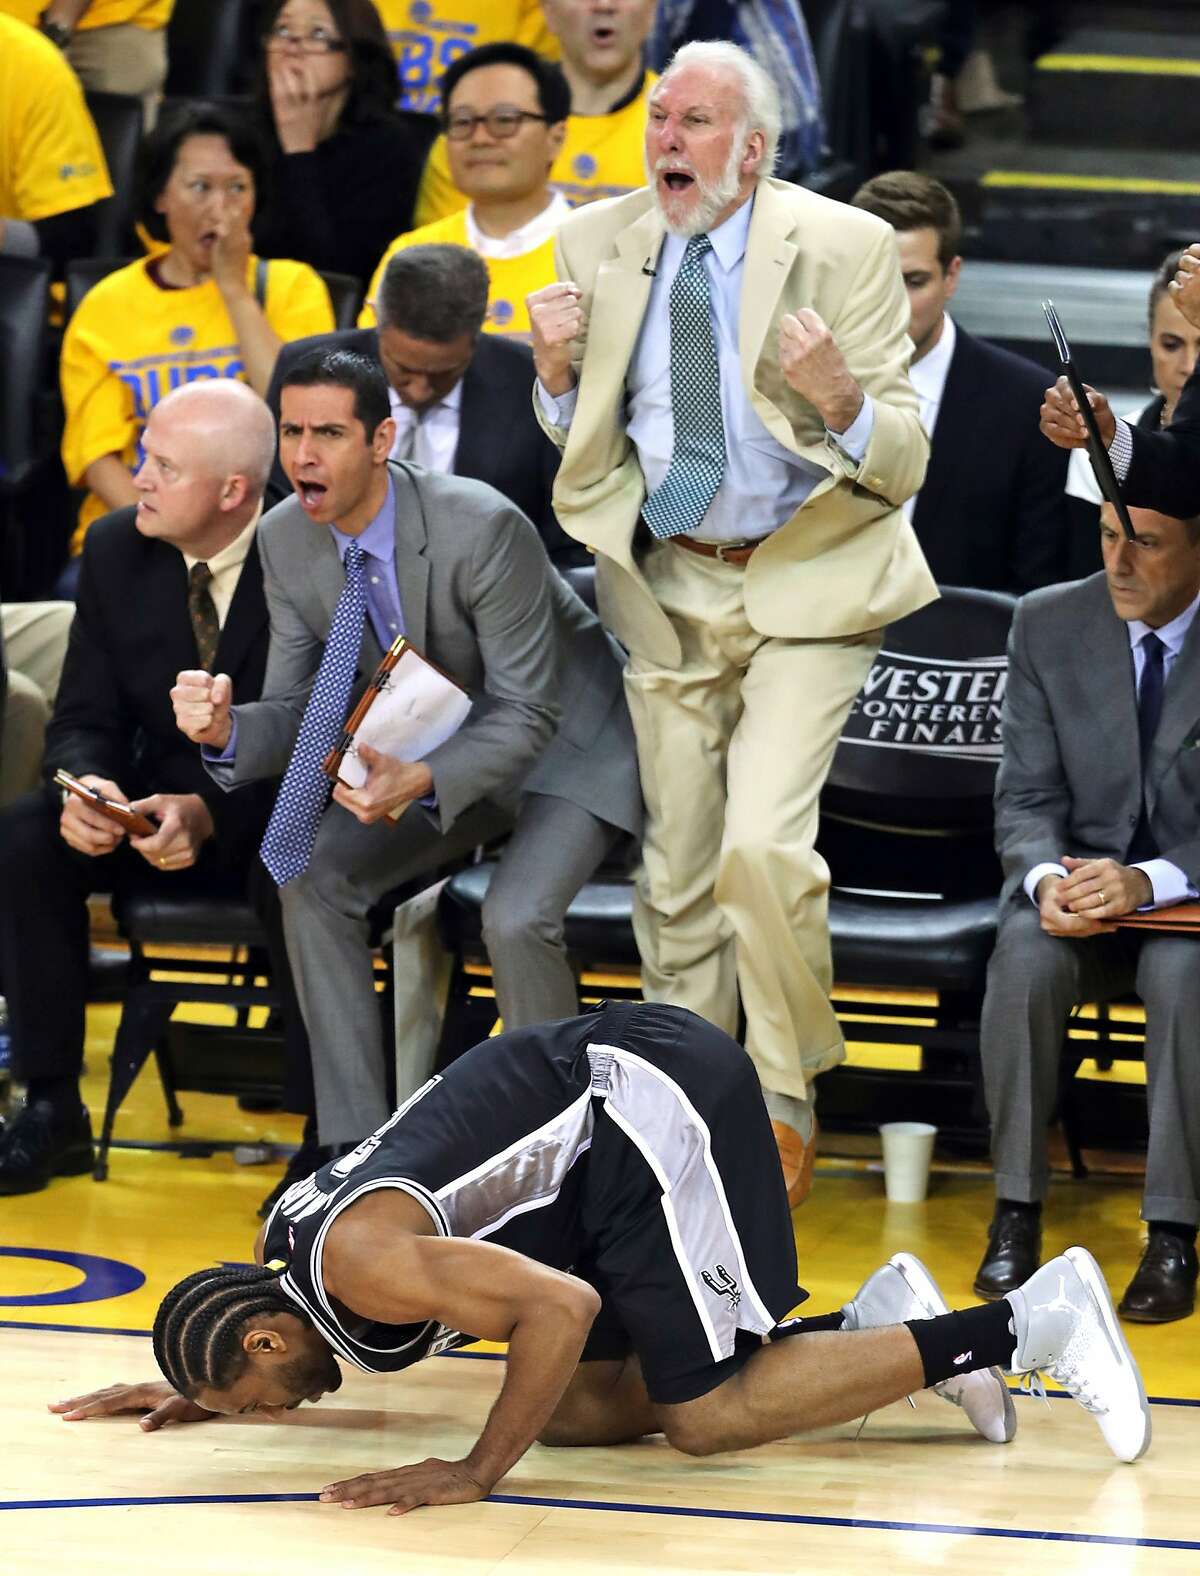 San Antonio Spurs' coach Gregg Popovich reacts to Kawhi Leonard re-injuring his ankle in 3rd quarter of Golden State Warriors' 113-111 win during Game 1 of NBA Western Conference Finals at Oracle Arena in Oakland, Calif., on Sunday, May 14, 2017.